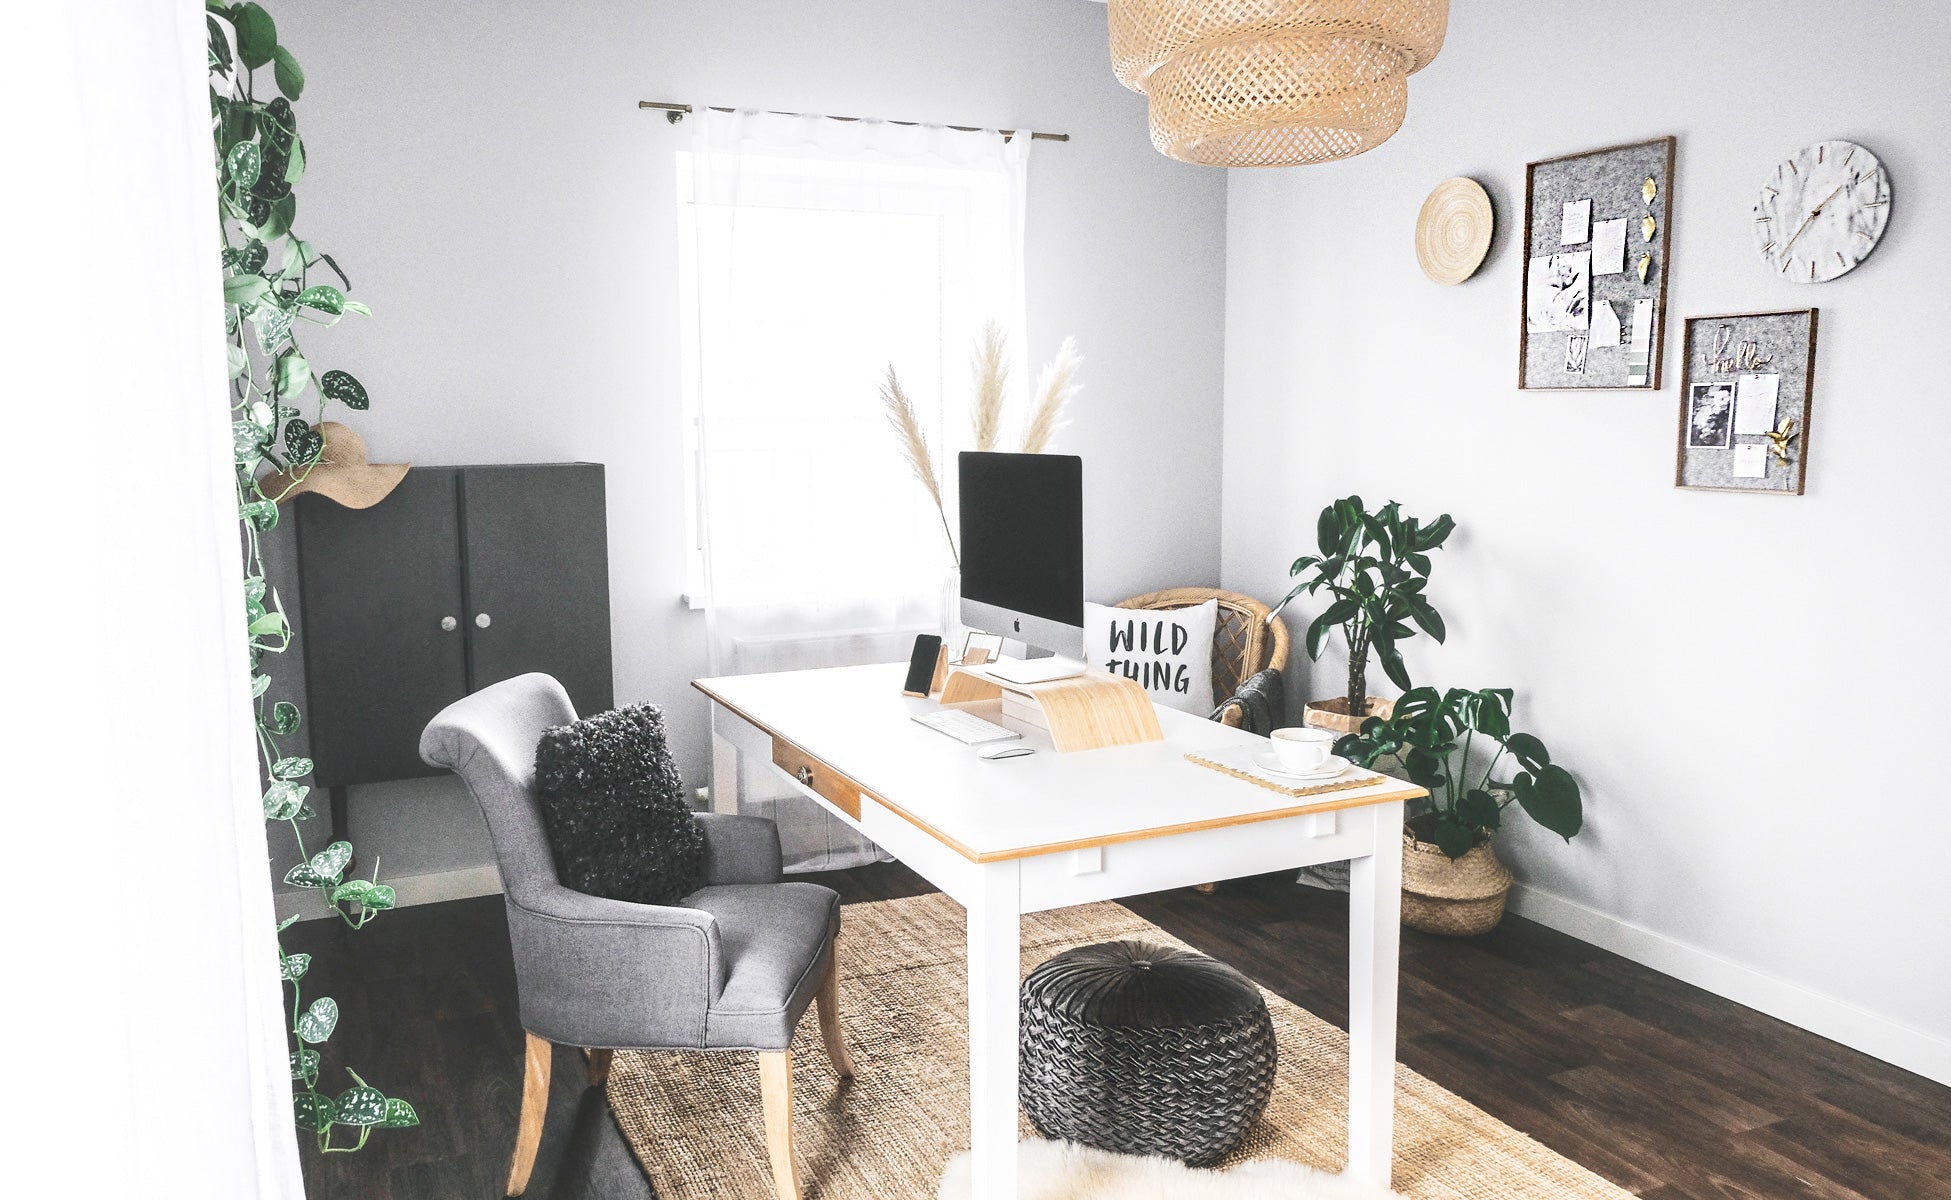 Minimalist bohemian office interior with grey color palette and gold accents